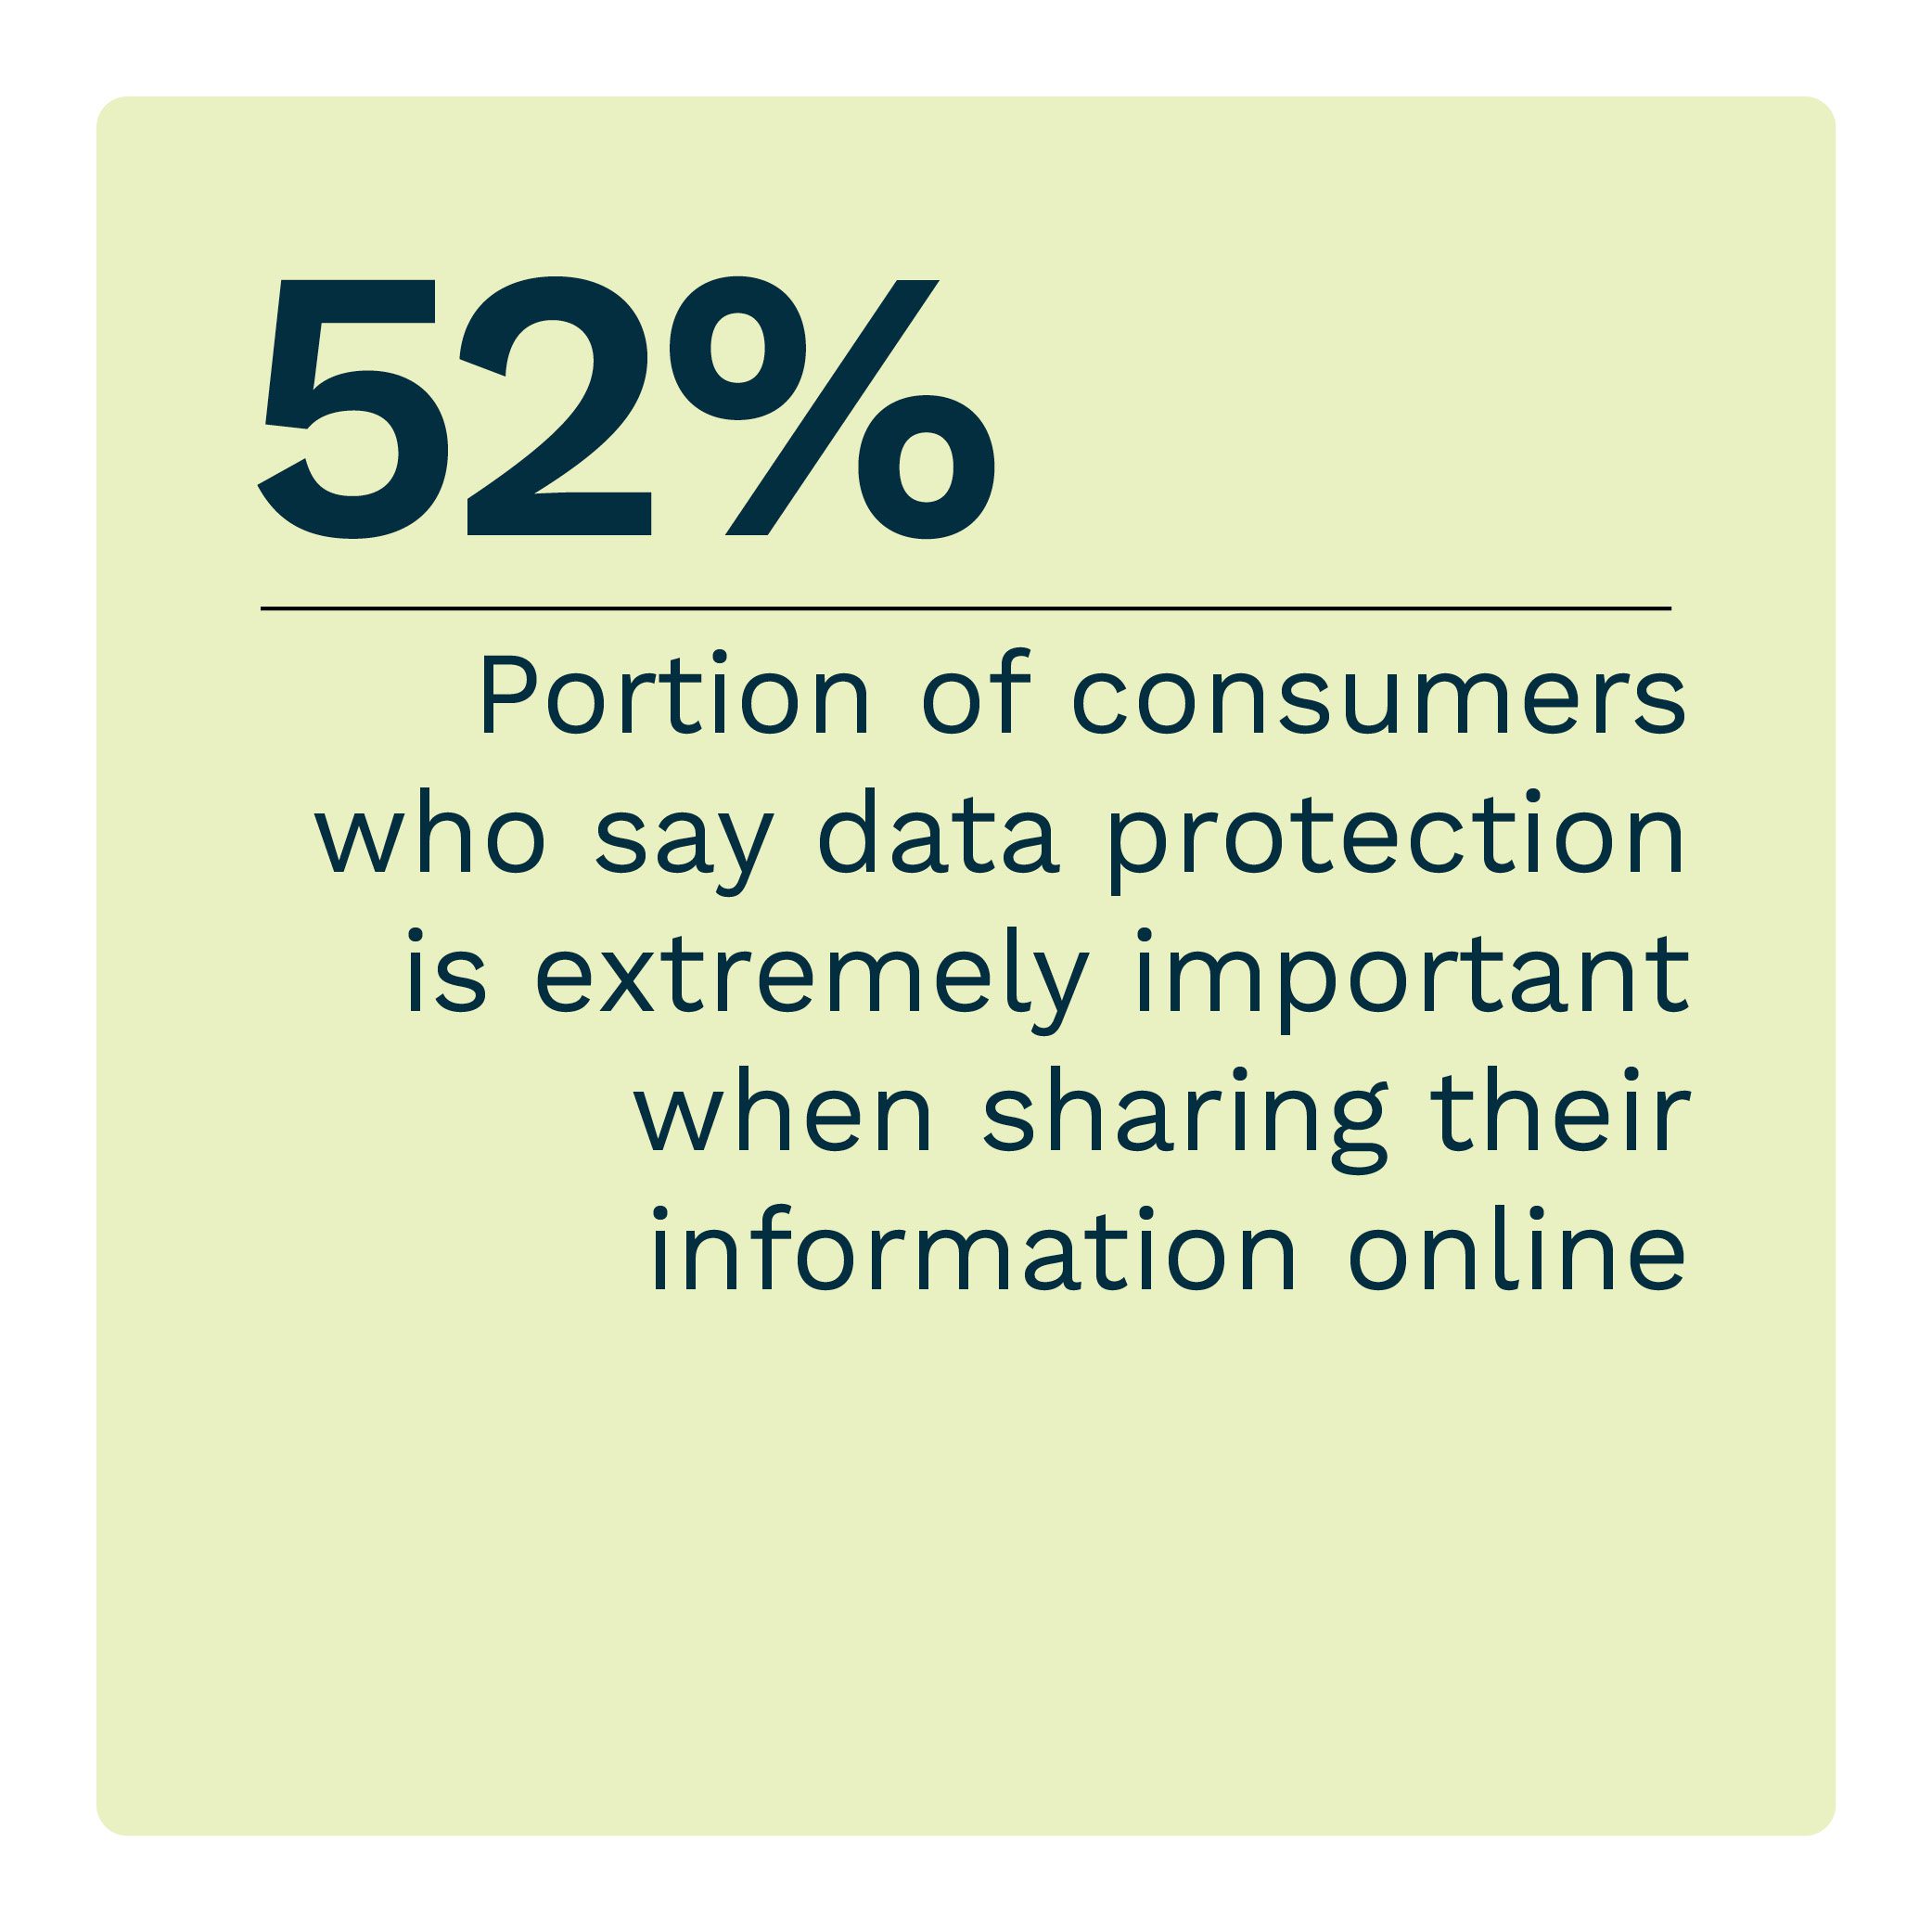 52%: Portion of consumers who say data protection is extremely important when sharing their information online